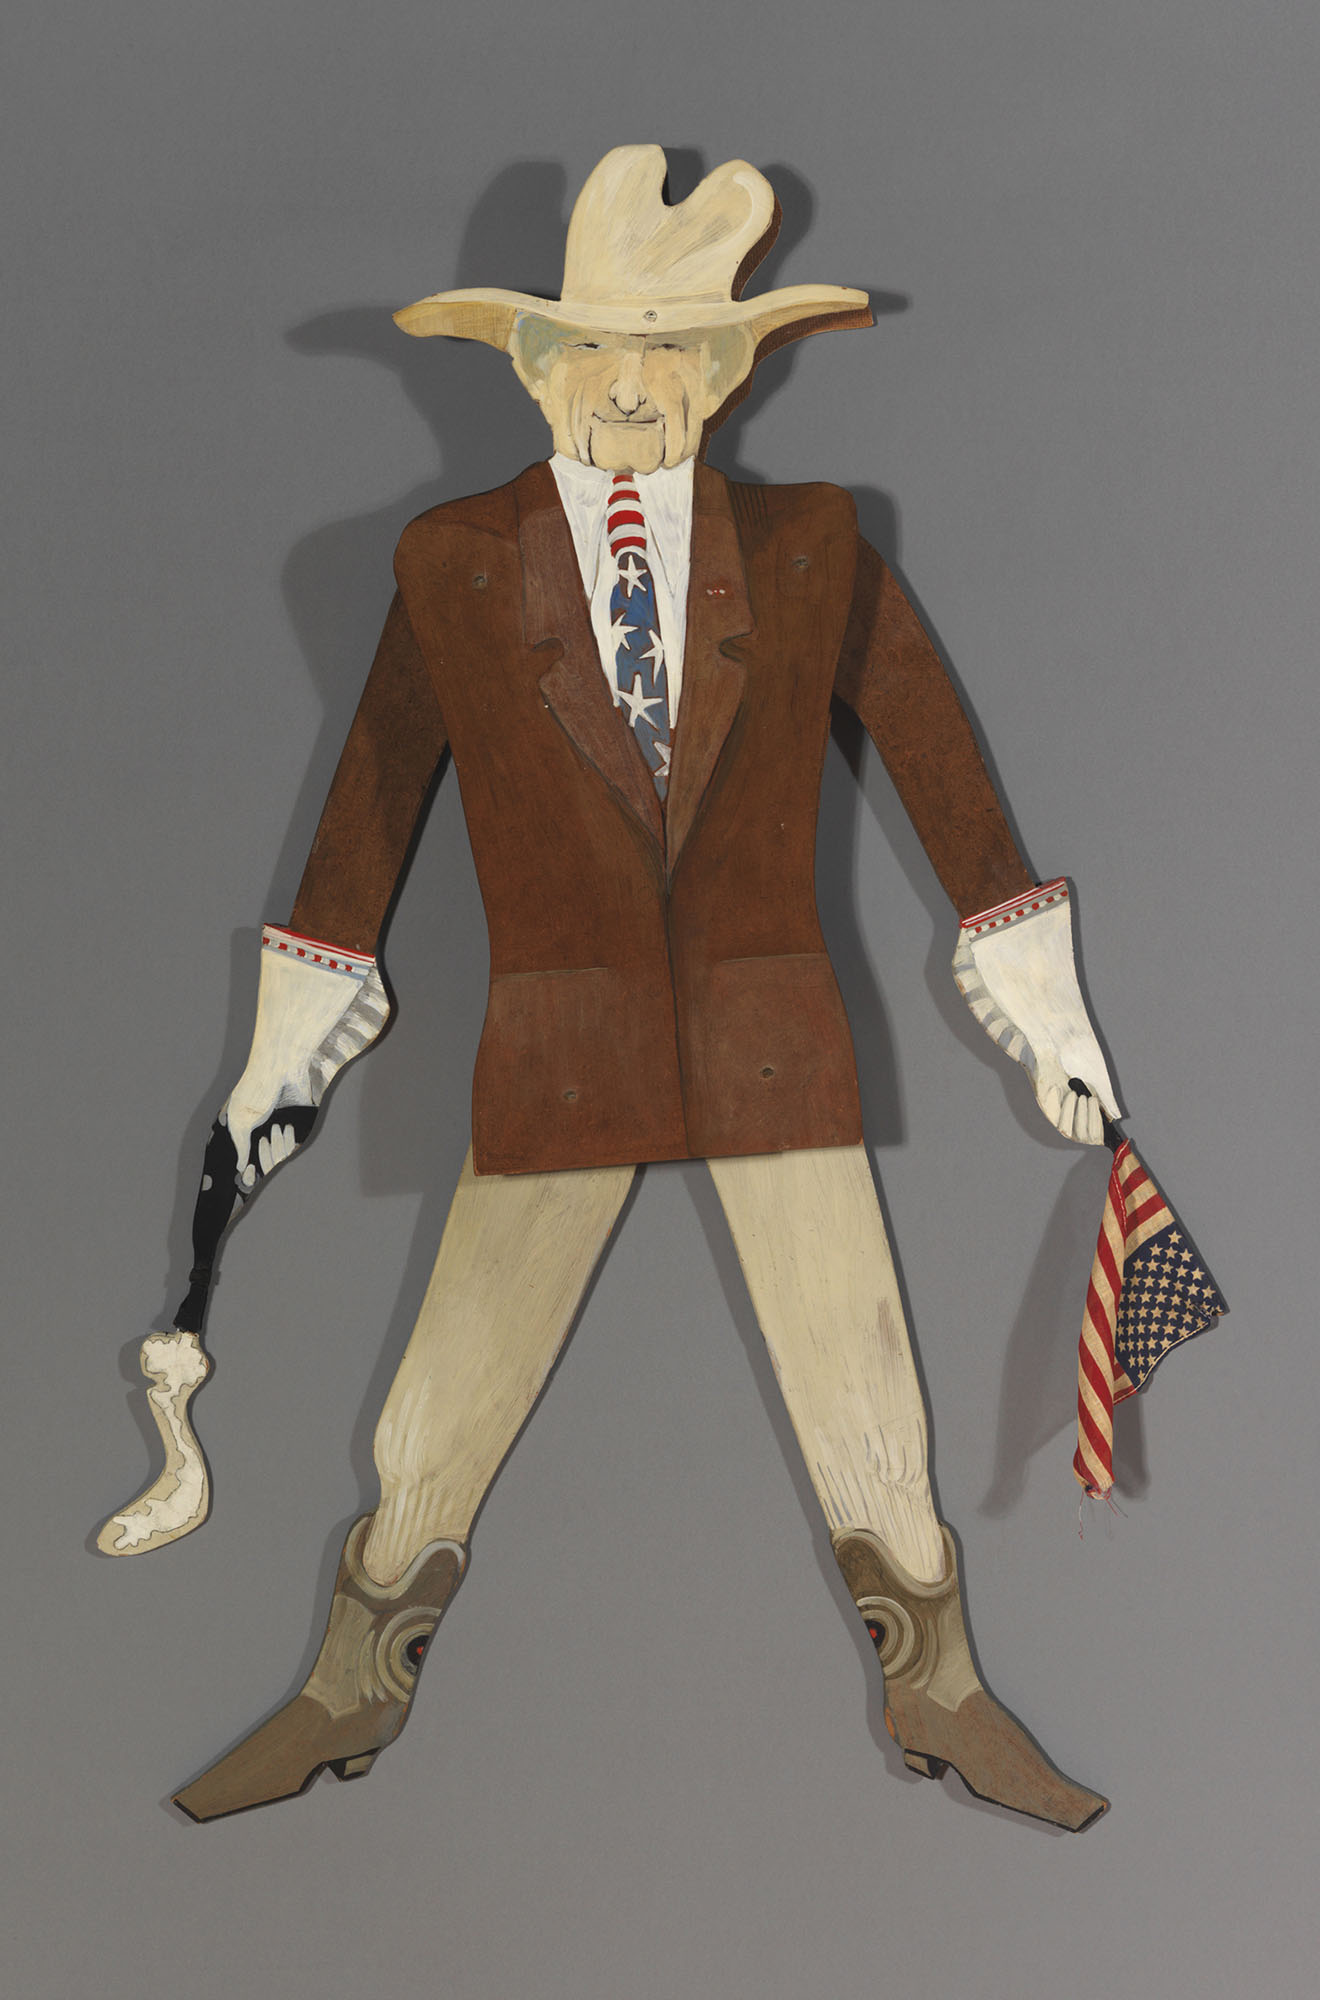 Ellen Lanyon, L.B.J. Doll, 1966. Wood, string, paint. Collection of Betsy Rosenfield. Photo by Tom Van Eynde